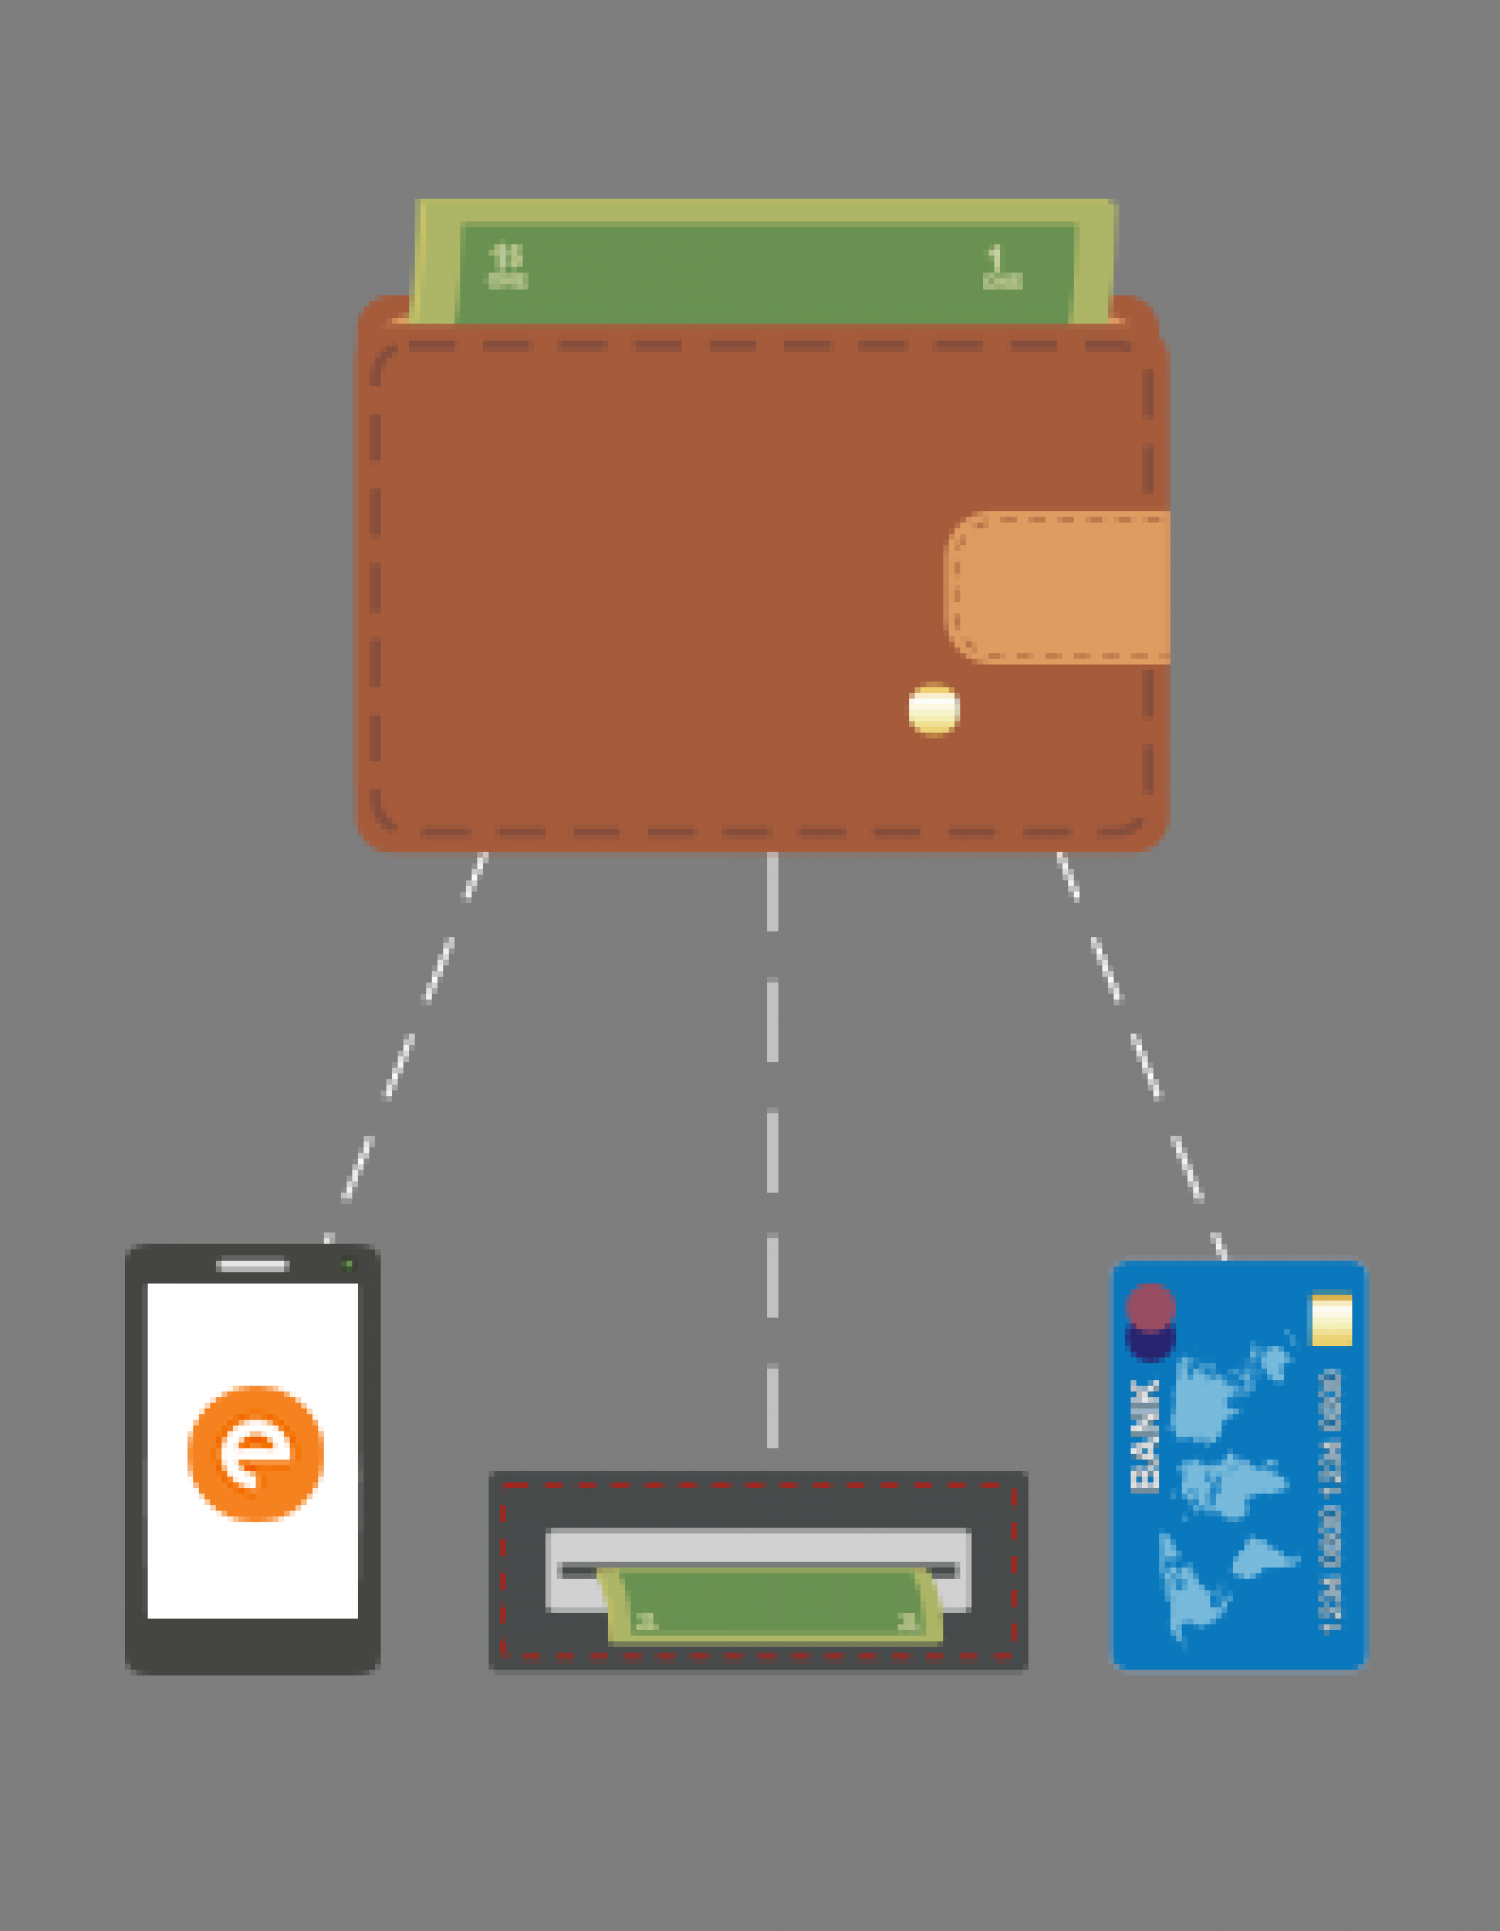 All about what to choose between Credit Card, Overdraft and Personal Loan. - CASHe Infographic